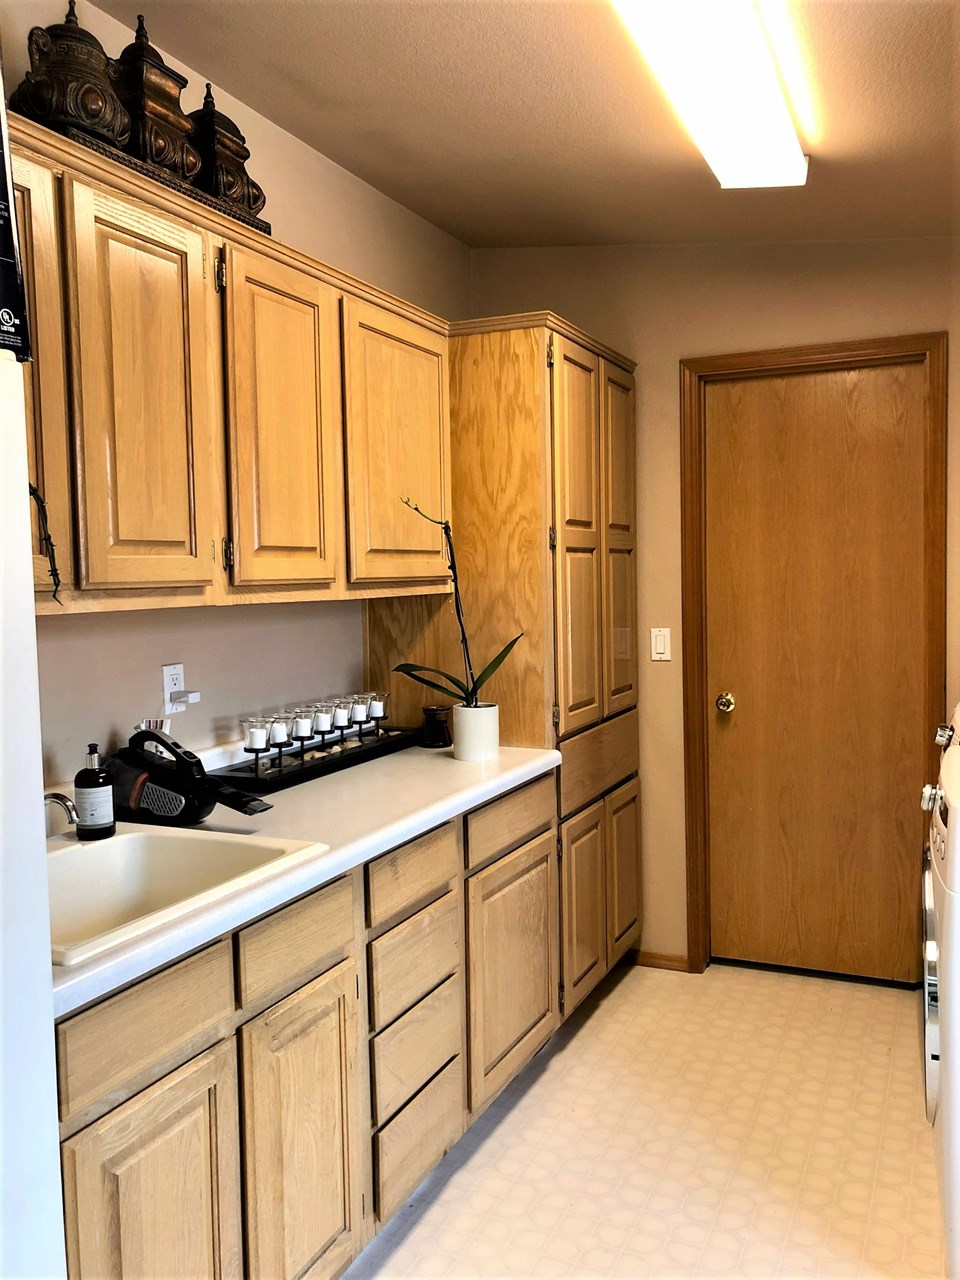 abundance of cupboard space and wash basin in laundry area